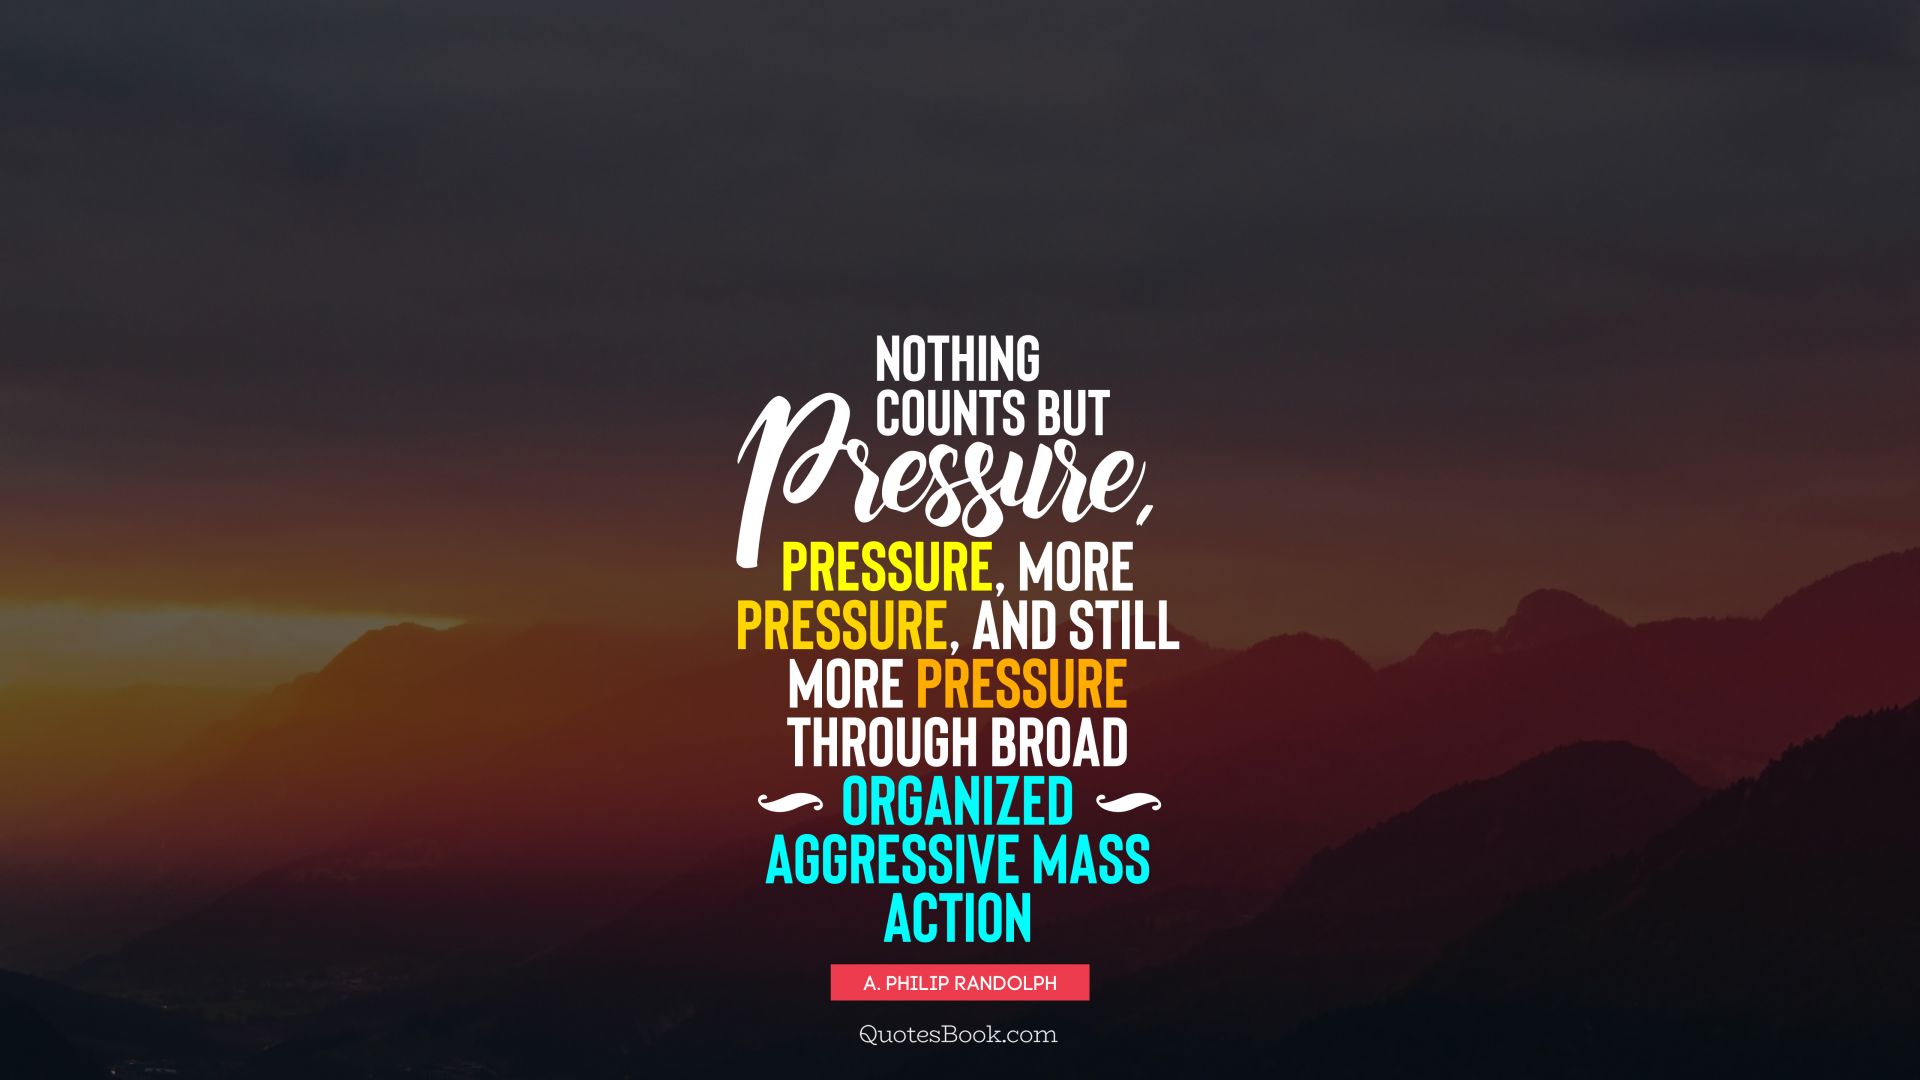 Nothing counts but pressure, pressure, more pressure, and still more pressure through broad organized aggressive mass action. - Quote by A. Philip Randolph